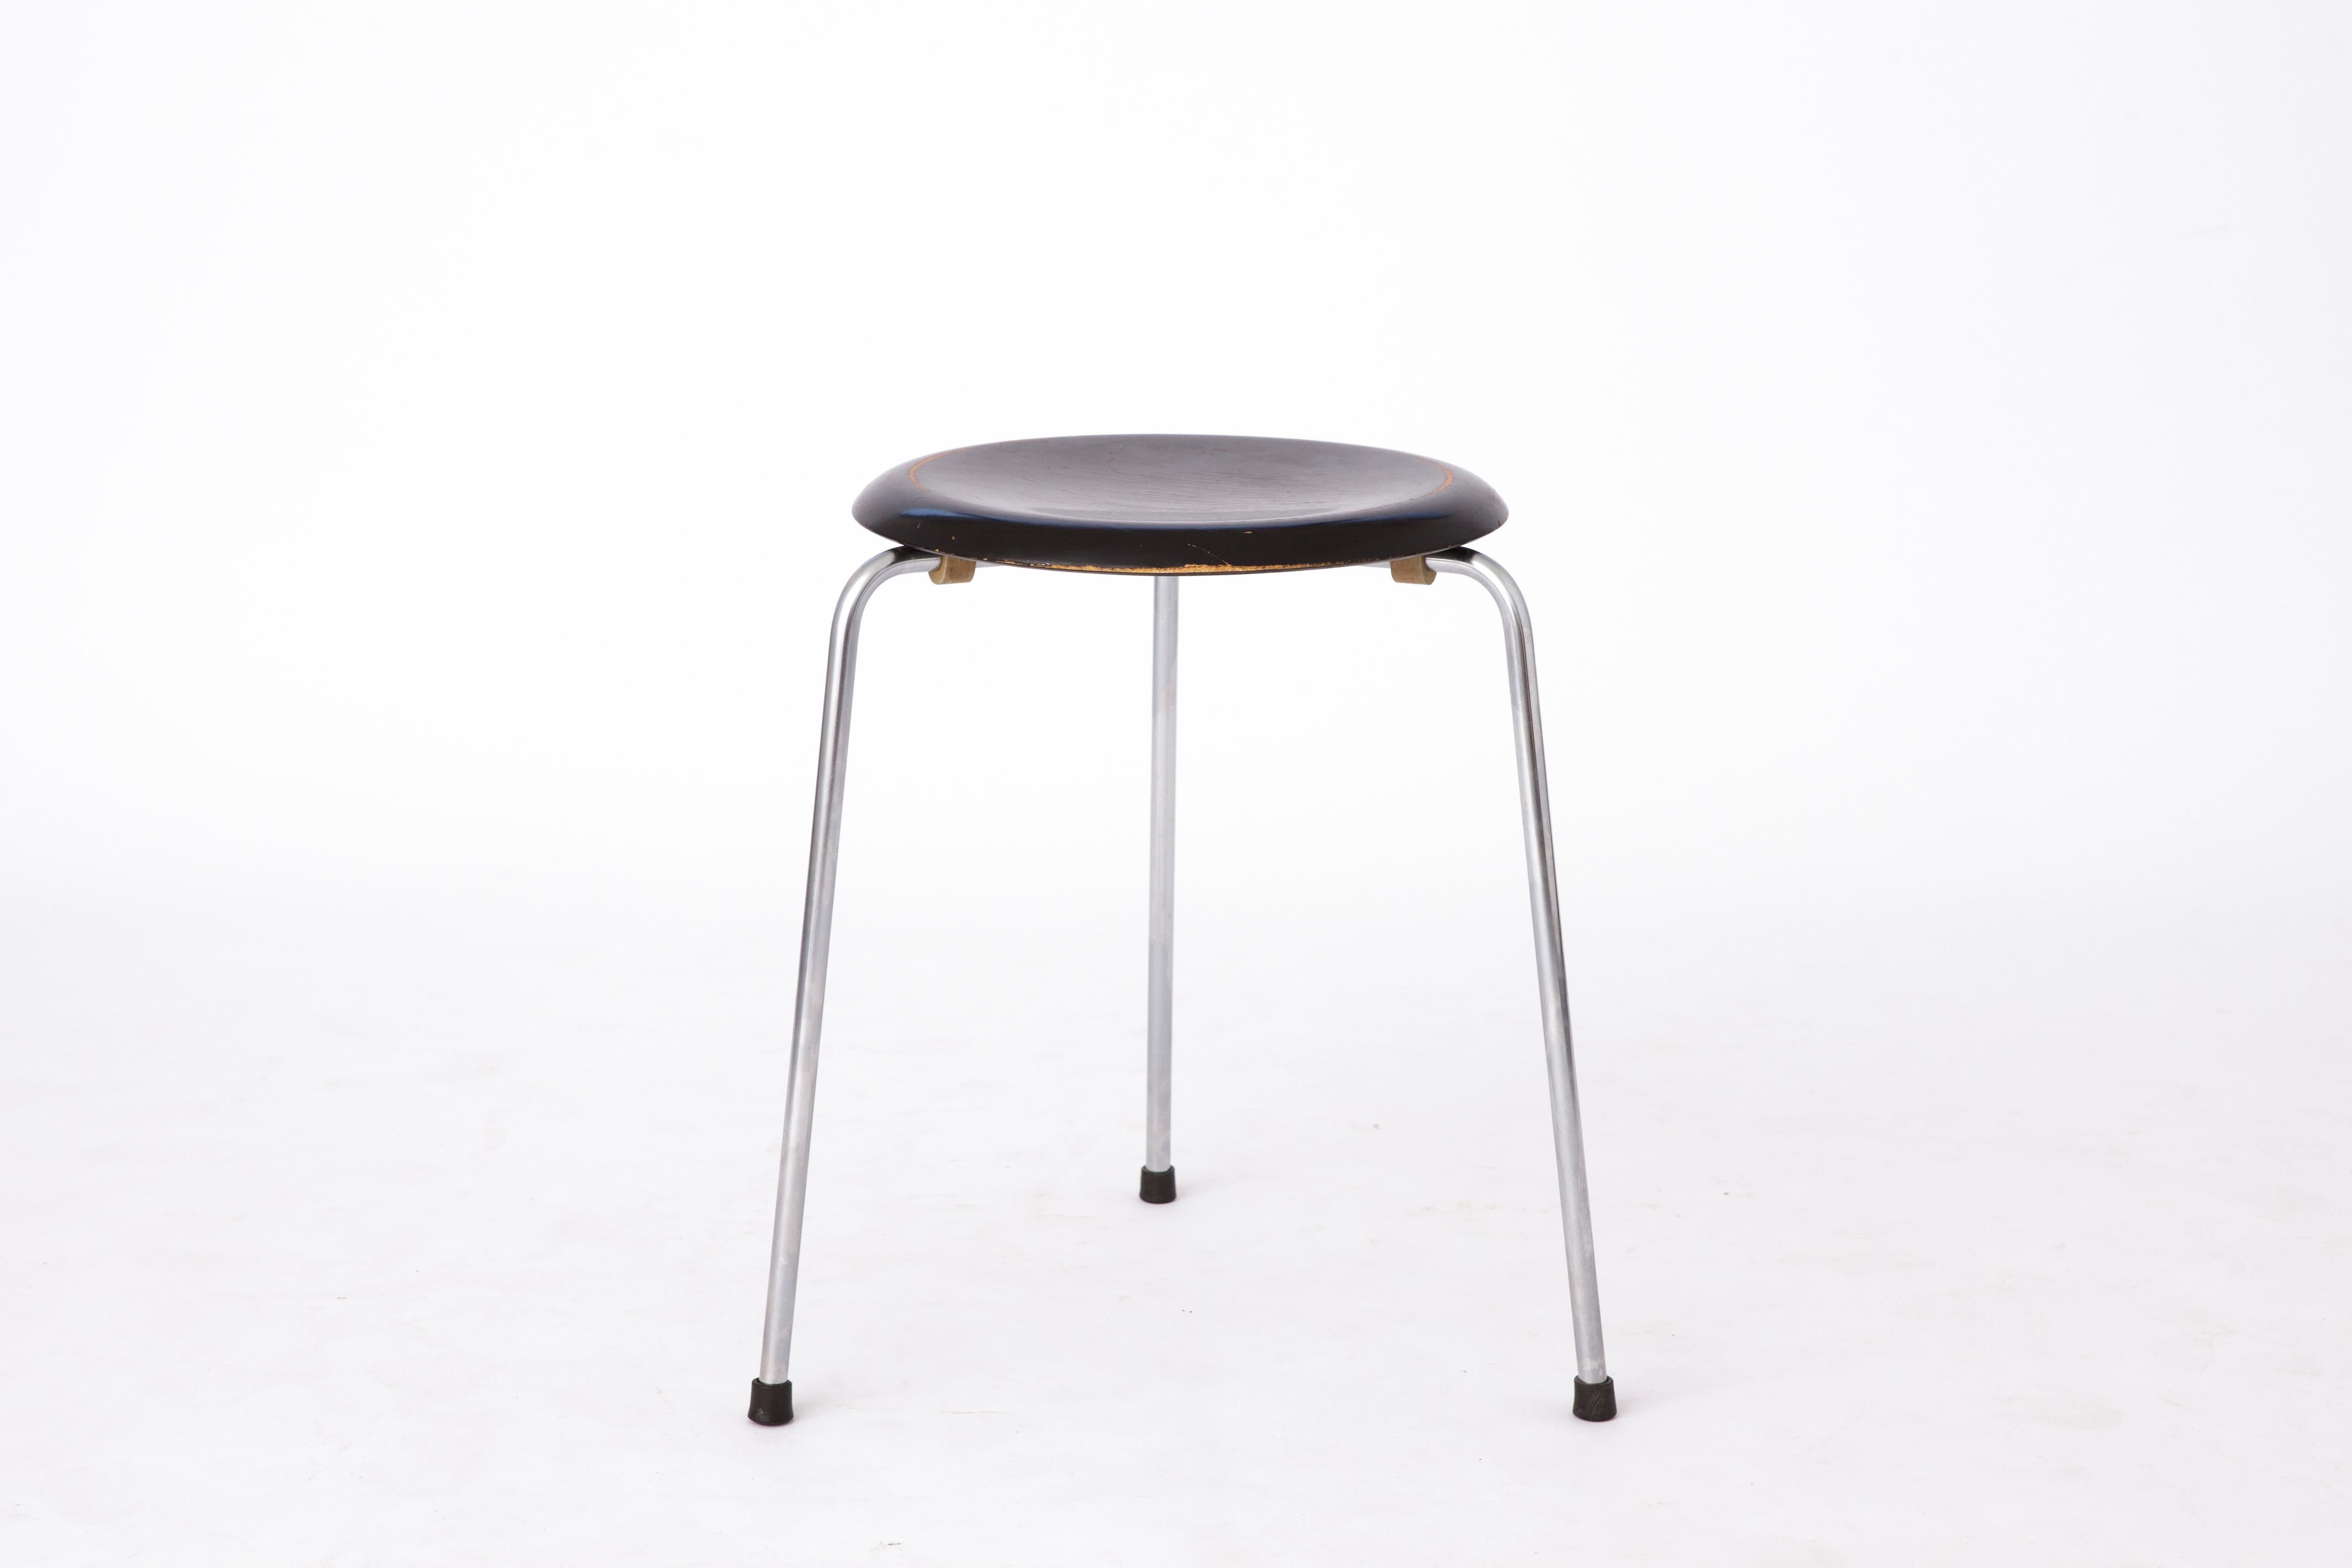 The stool DOT was designed by Arne Jacobsen in the 1950s at the same time as the Ant Chair or the Ant and manufactured by Fritz Hansen. Officially, it came out in 1954 as an originally three-legged stool in veneer. From 1970 the Dot was relaunched